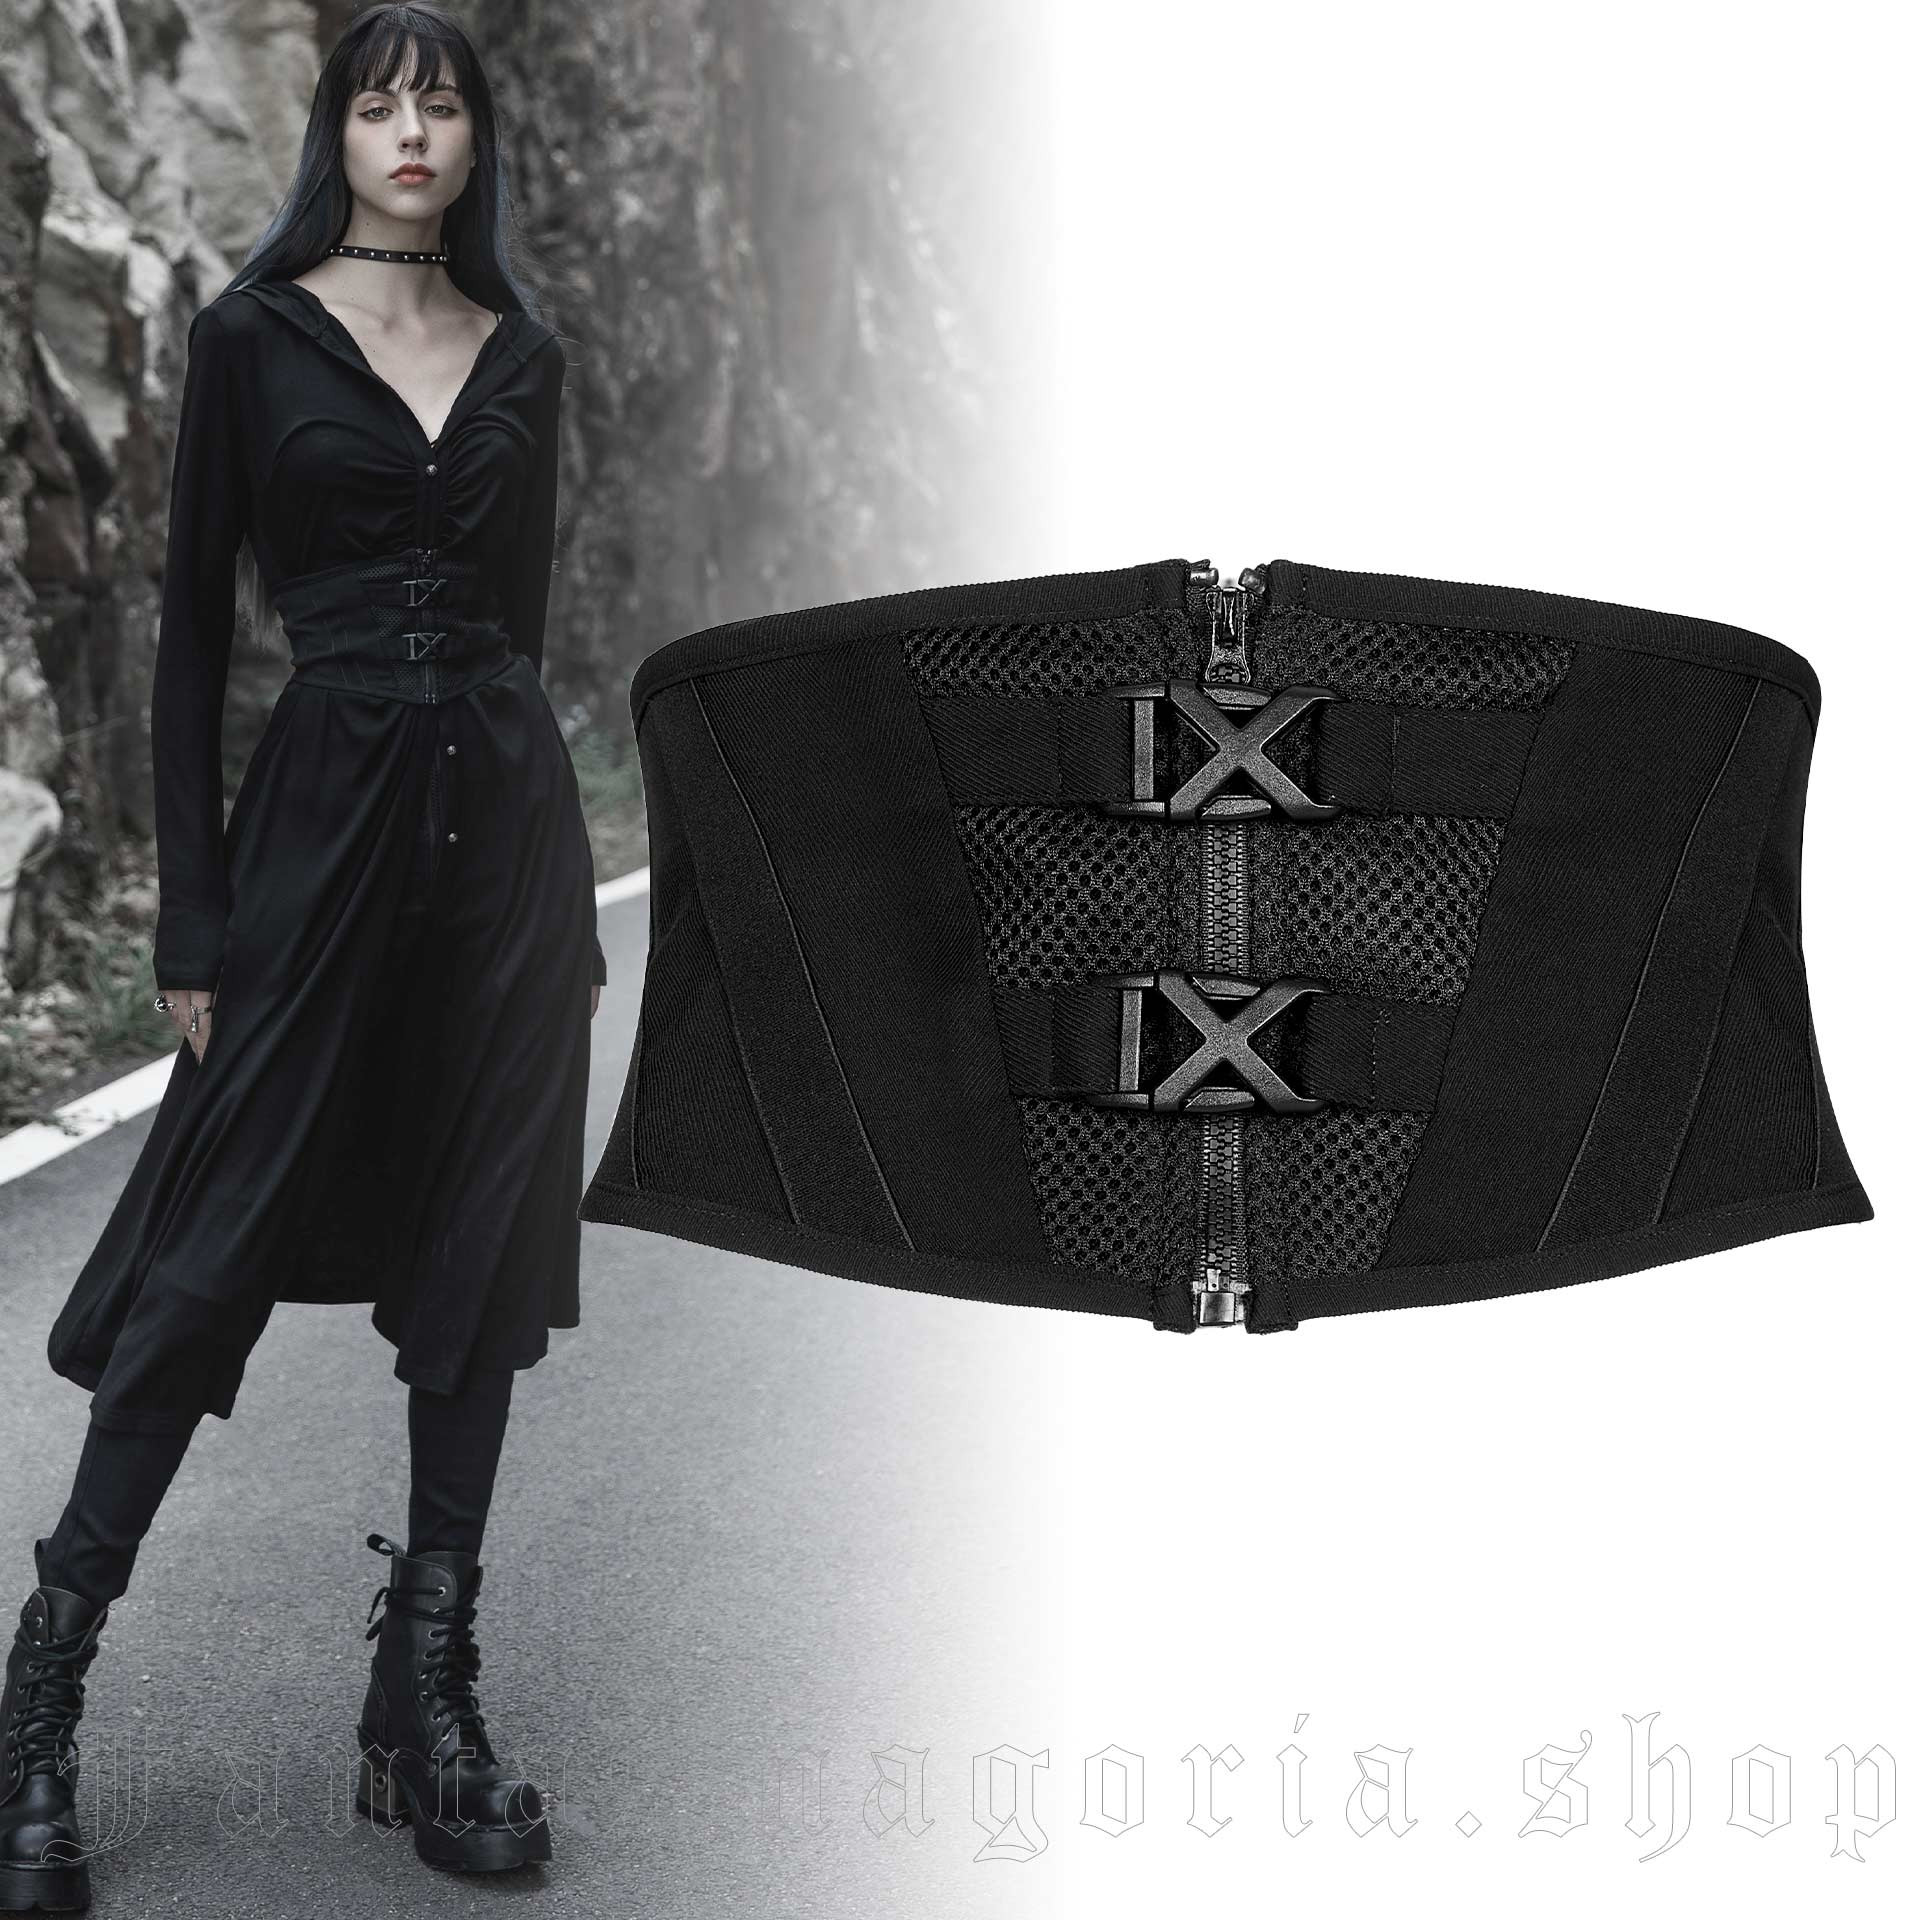 Lace & Leather Corset Belt Costume Corset for Goth 